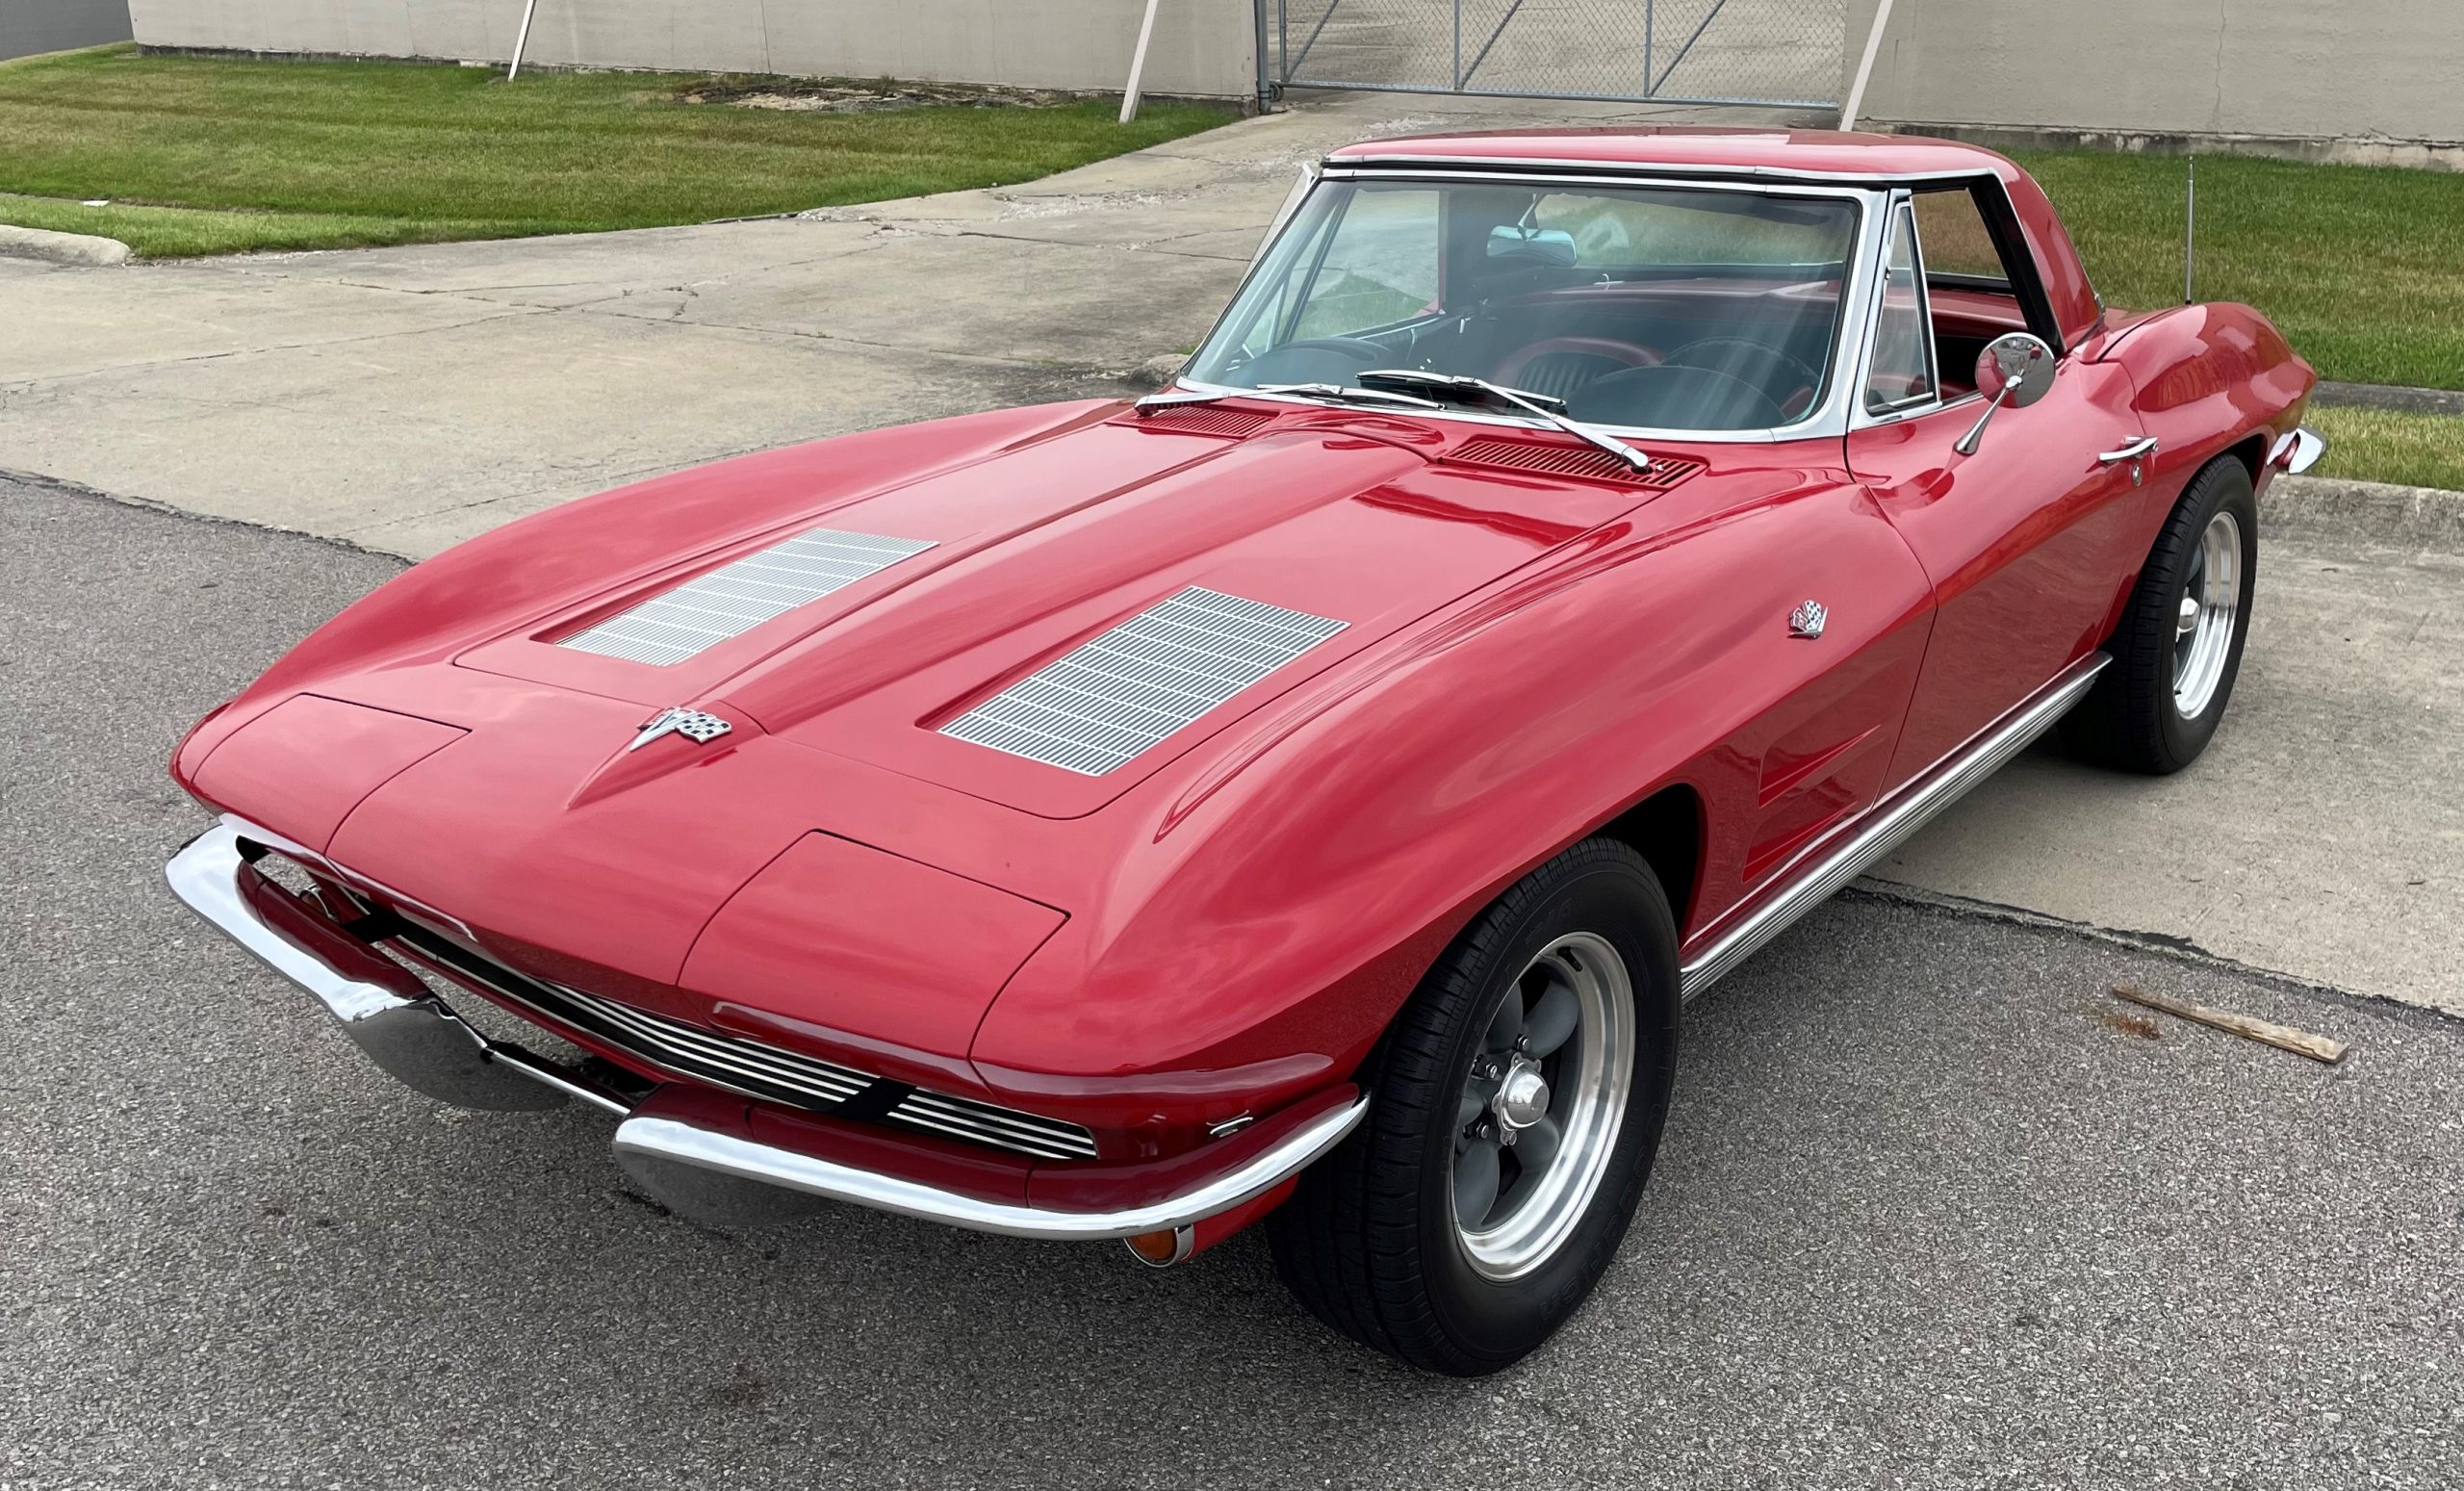 A Look Back at the History of the Corvette C2 (1963-67) Sting Ray Generation